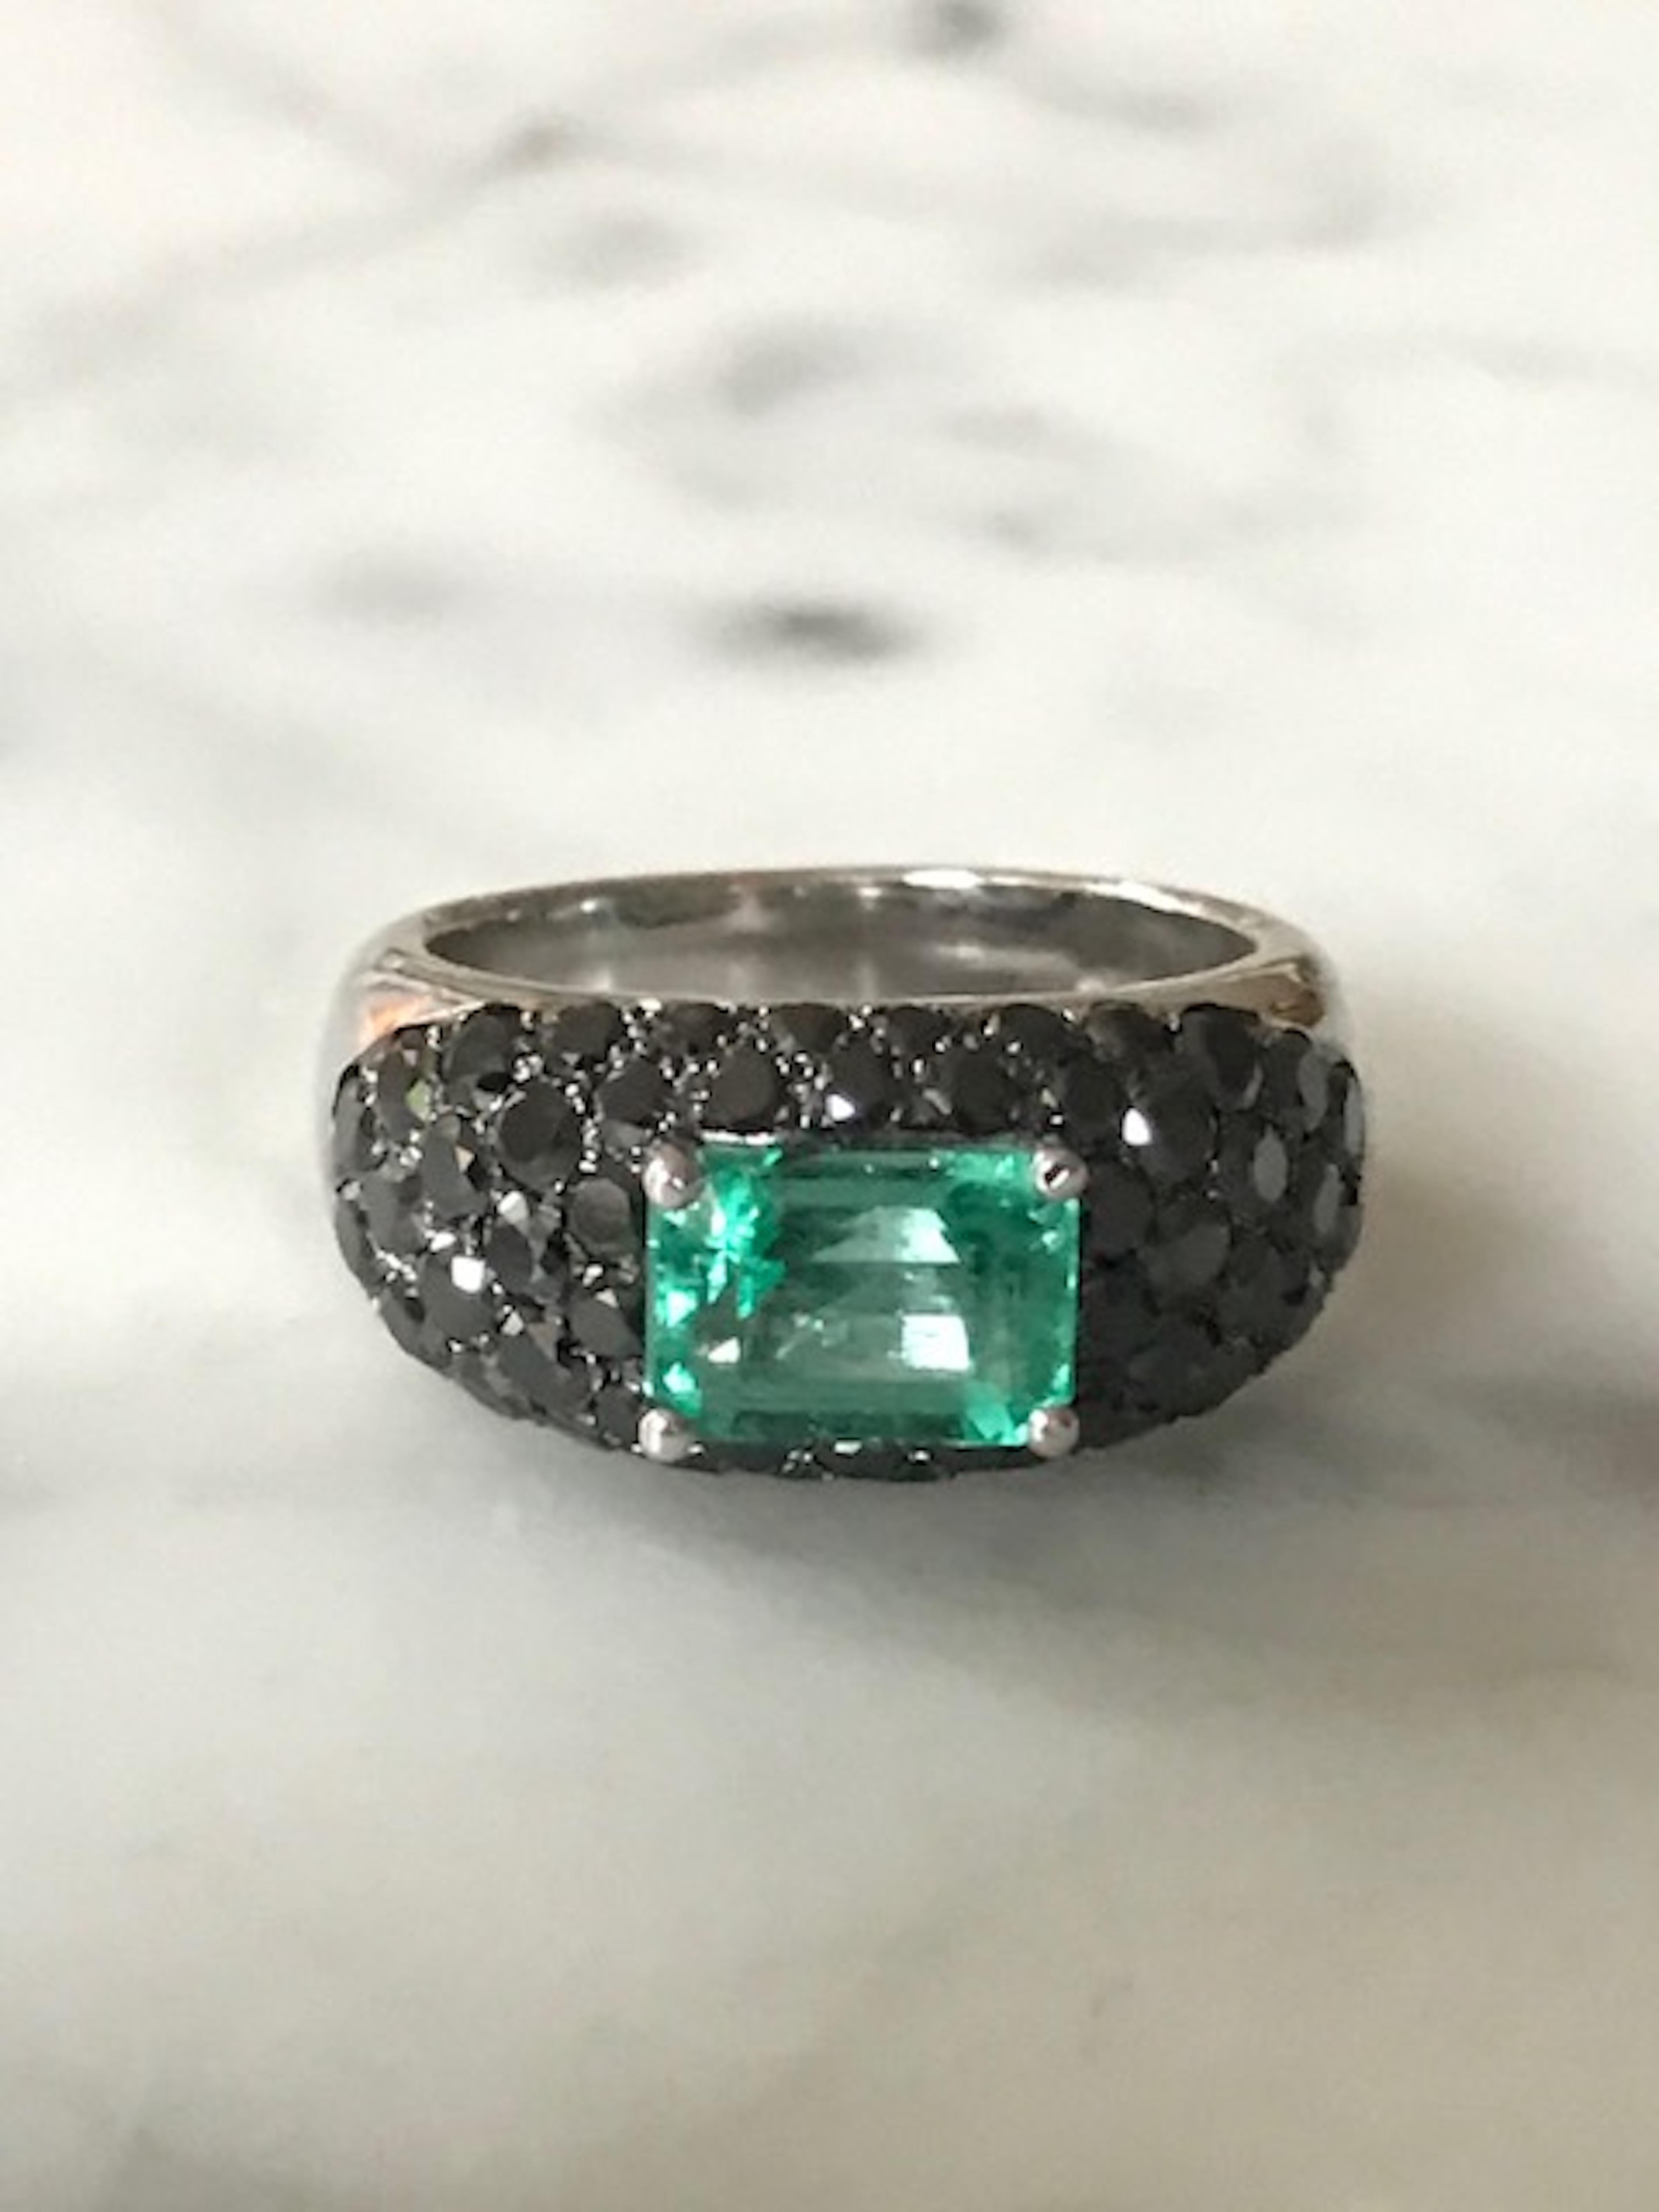 Emerald Cut Columbian Emerald 2 Carat Ring 18 Carat White Gold Set with Black Diamonds Italy For Sale